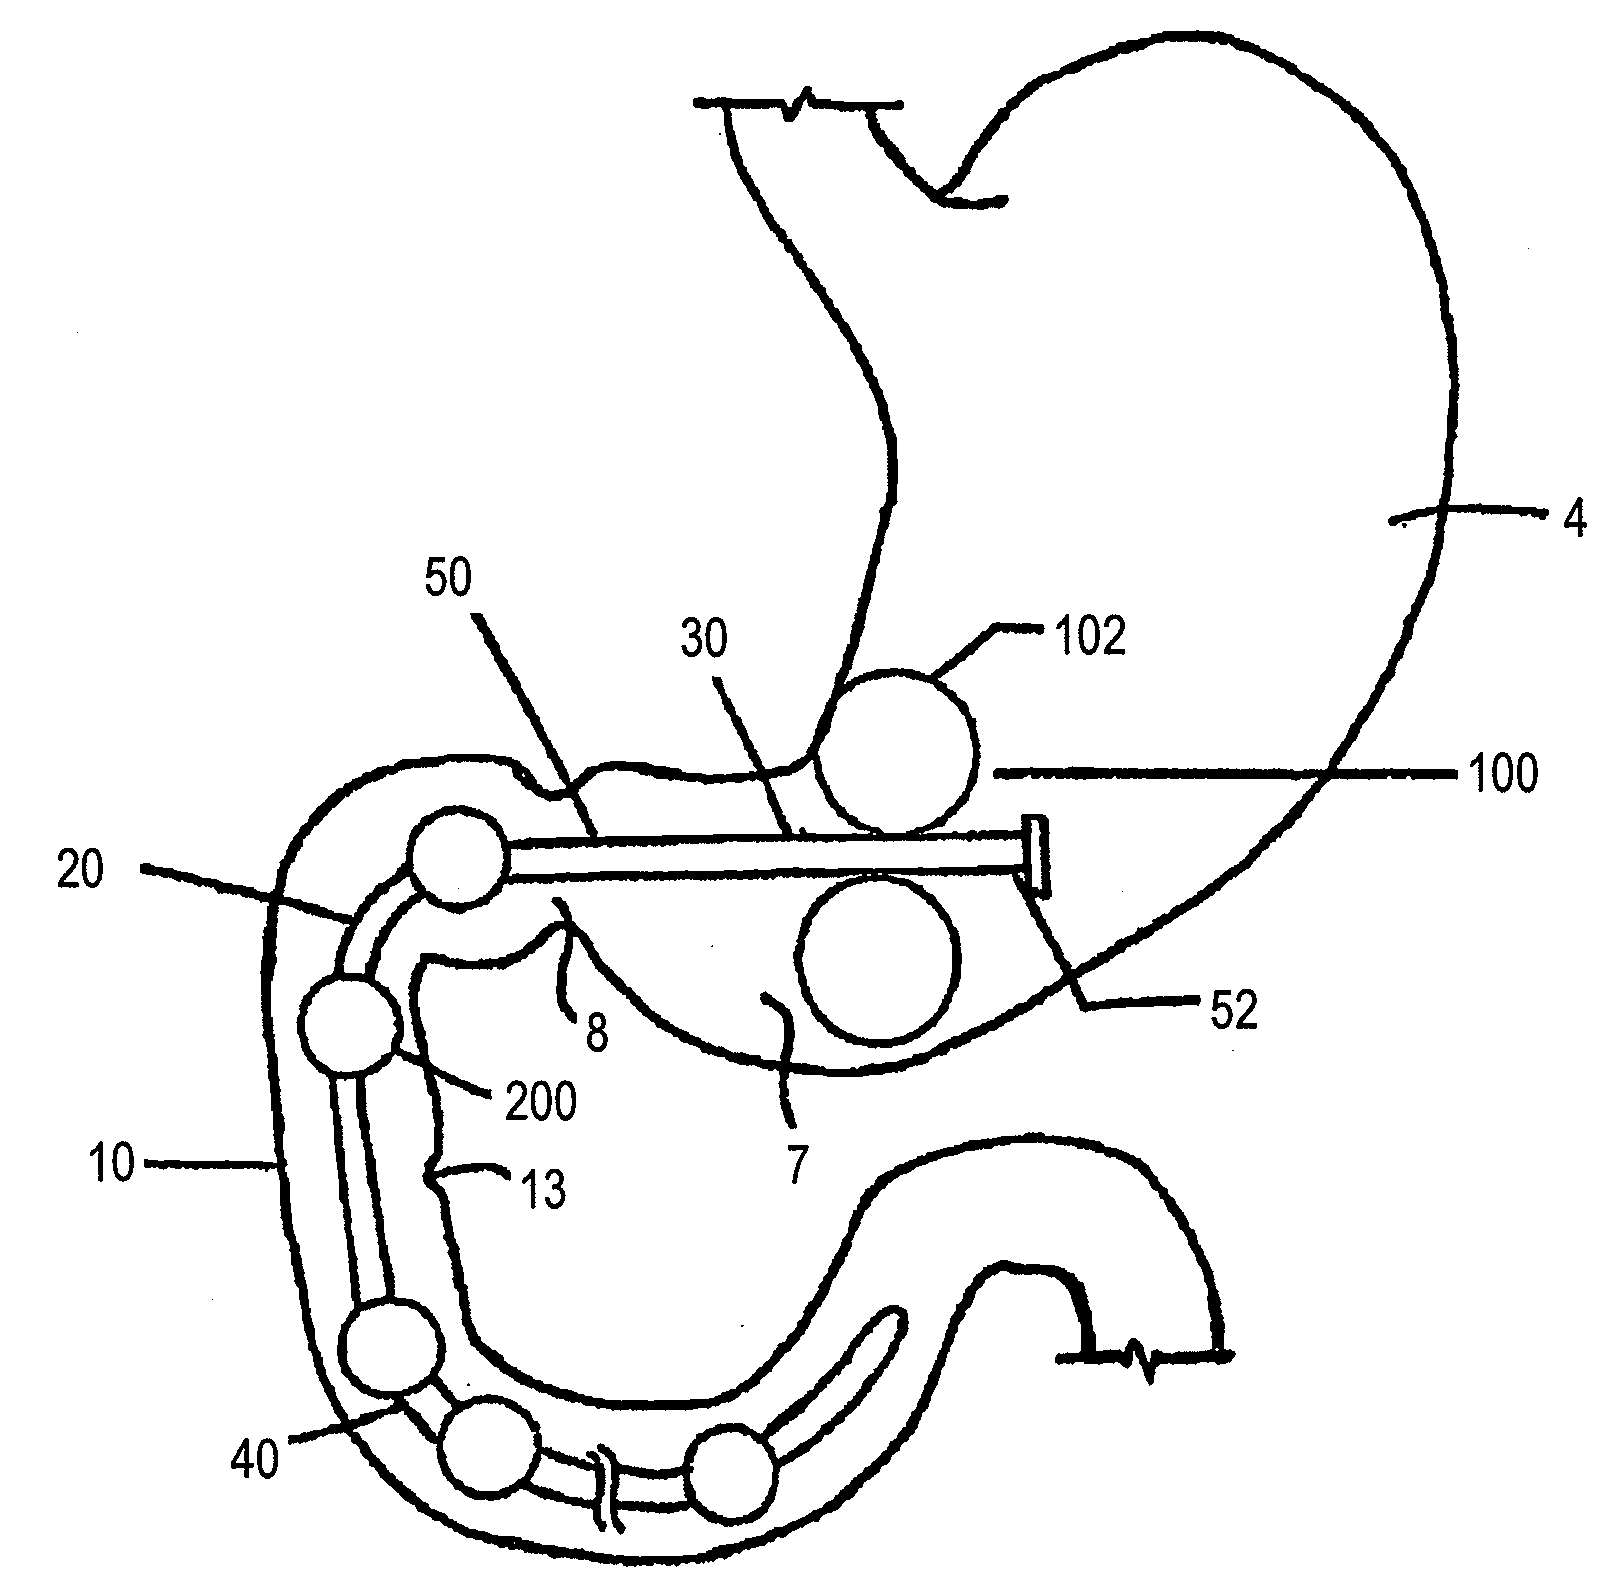 Conformationally-Stabilized Intraluminal Device for Medical Applications